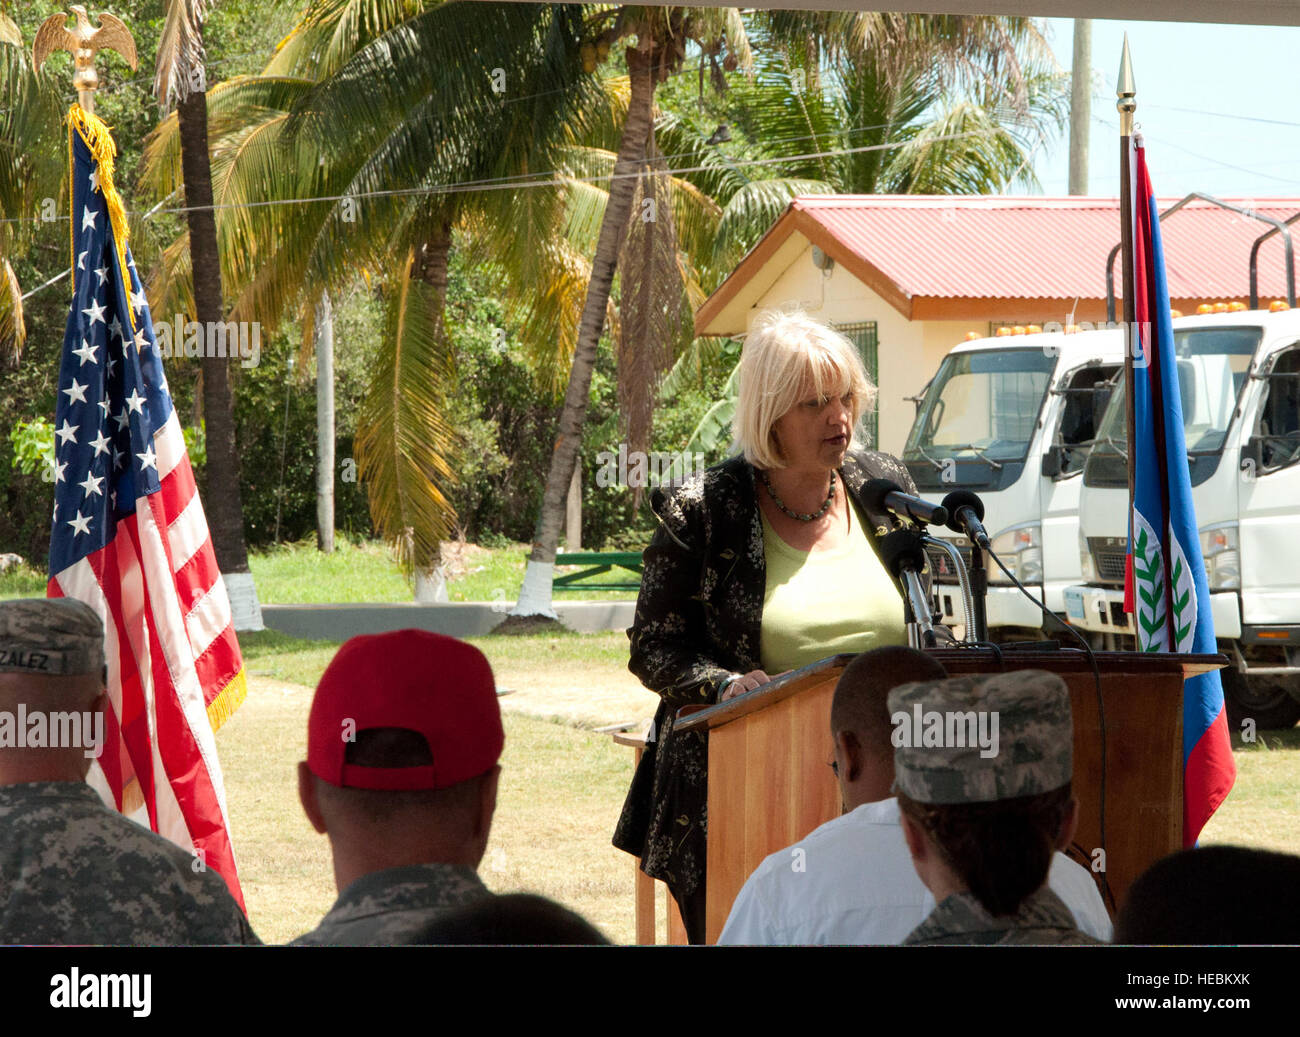 Margaret Hawthorne, charg?? d'affaires at the U.S. embassy in Belize, speaks during the New Horizons Belize 2014 opening ceremonies April 10, 2014, at the Edward P. Yorke school in Belize City, Belize. New Horizons is a multifaceted, international exercise comprising Belize Defence Force and U.S. military civil engineers constructing four school facilities and one medical care facility, and it also encompasses numerous medical readiness training exercises throughout the country. Opening ceremonies included presentations by each of the four schools receiving new facilities, as well as speeches  Stock Photo